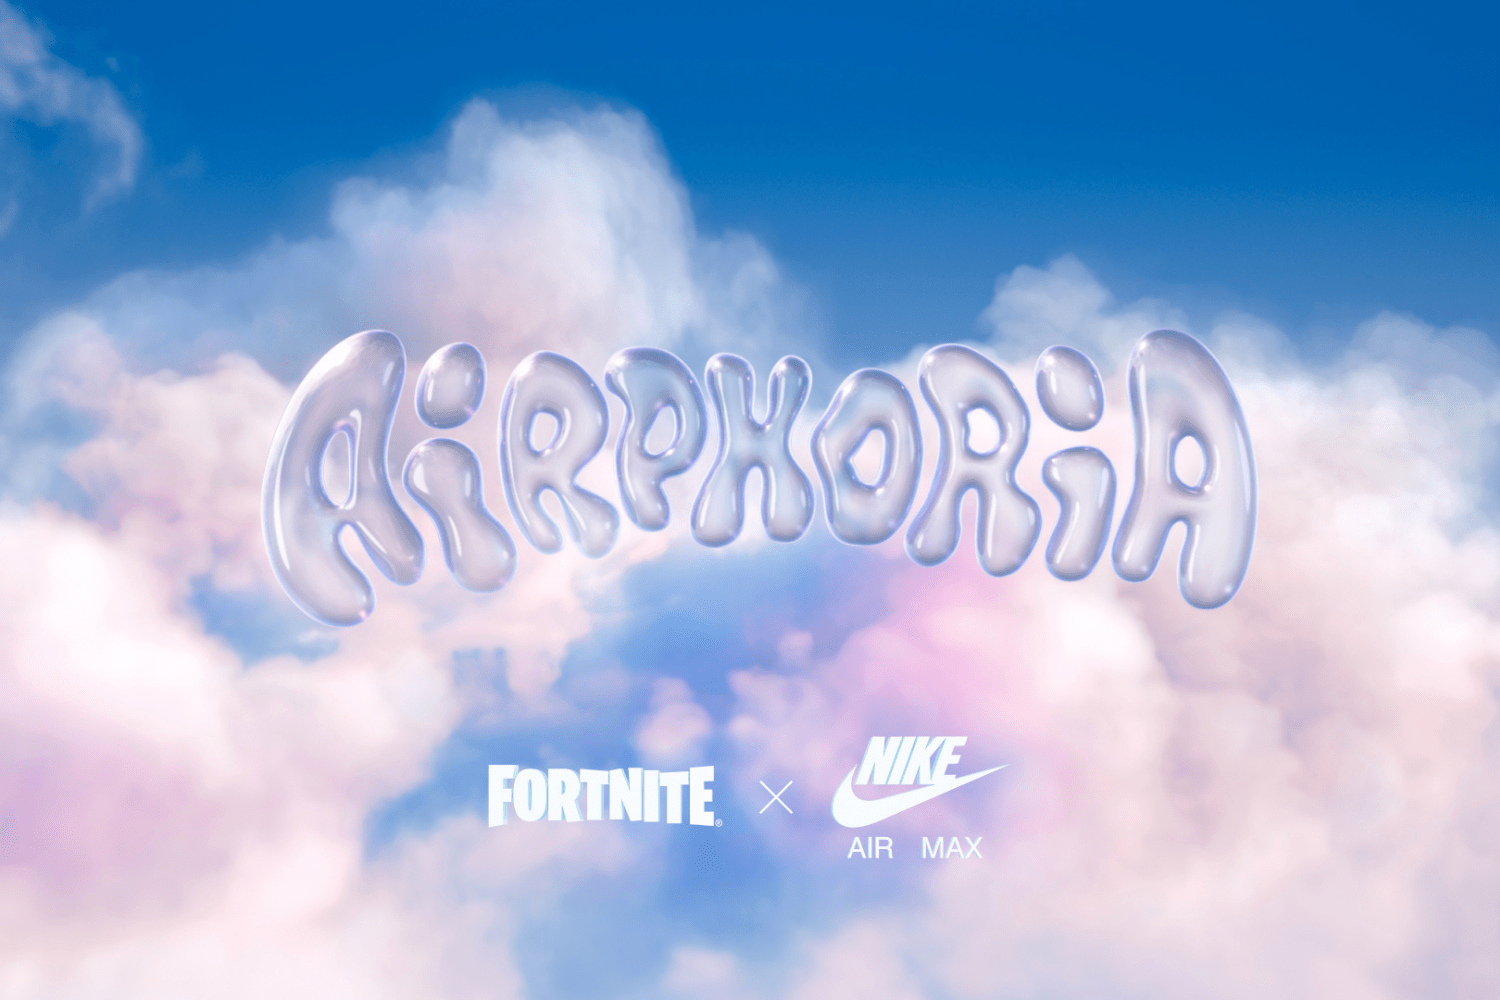 Nike surprises Fortnite players with launch of 'Airphoria'